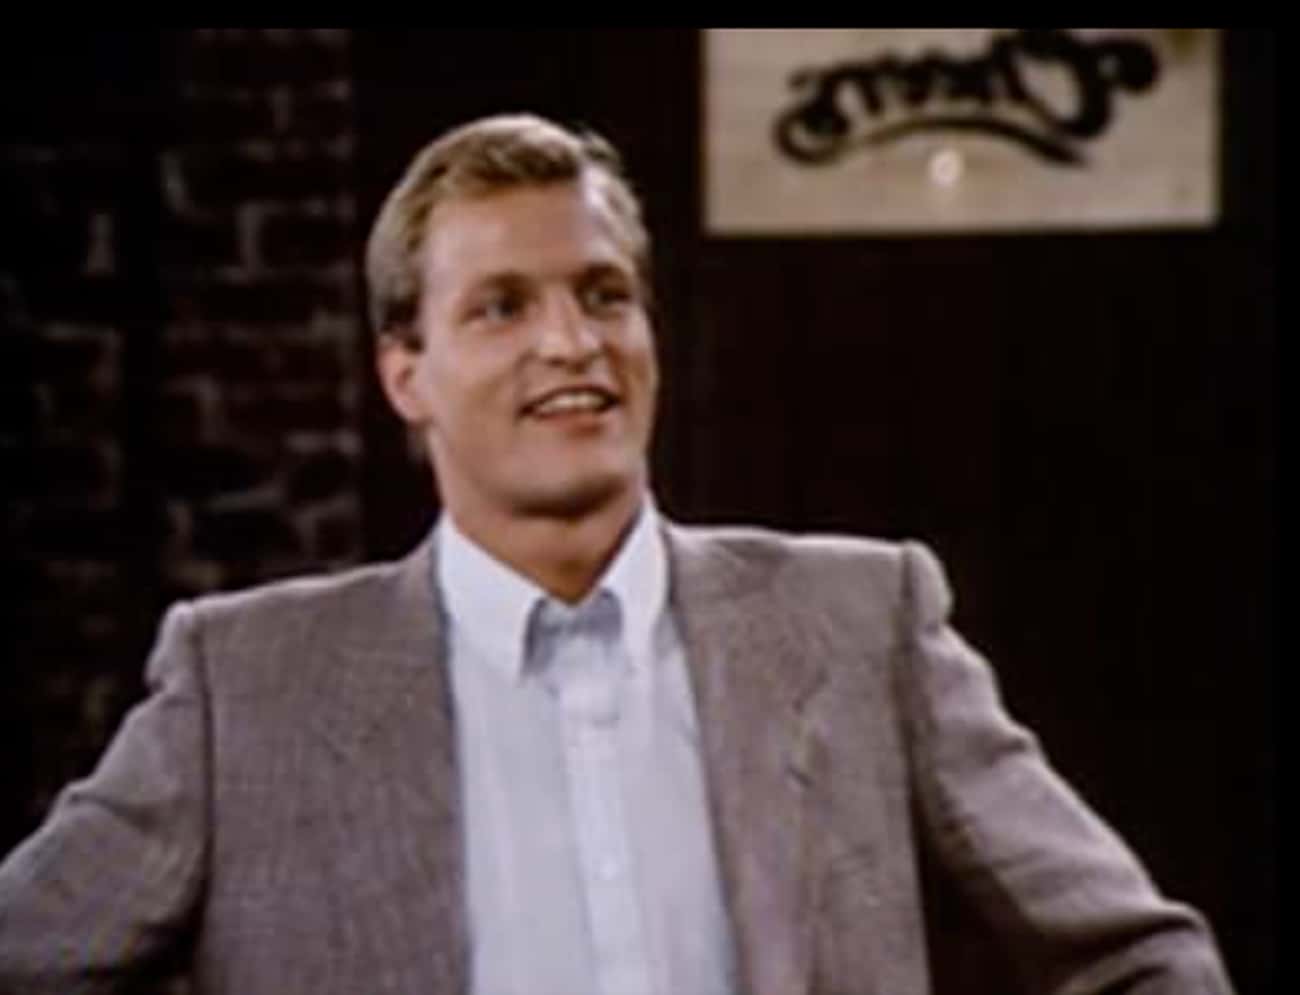 Woody Harrelson Got Challenged By The Cast Of ‘Cheers’ At Basketball, Arm Wrestling, Etc - But Crushed Them All